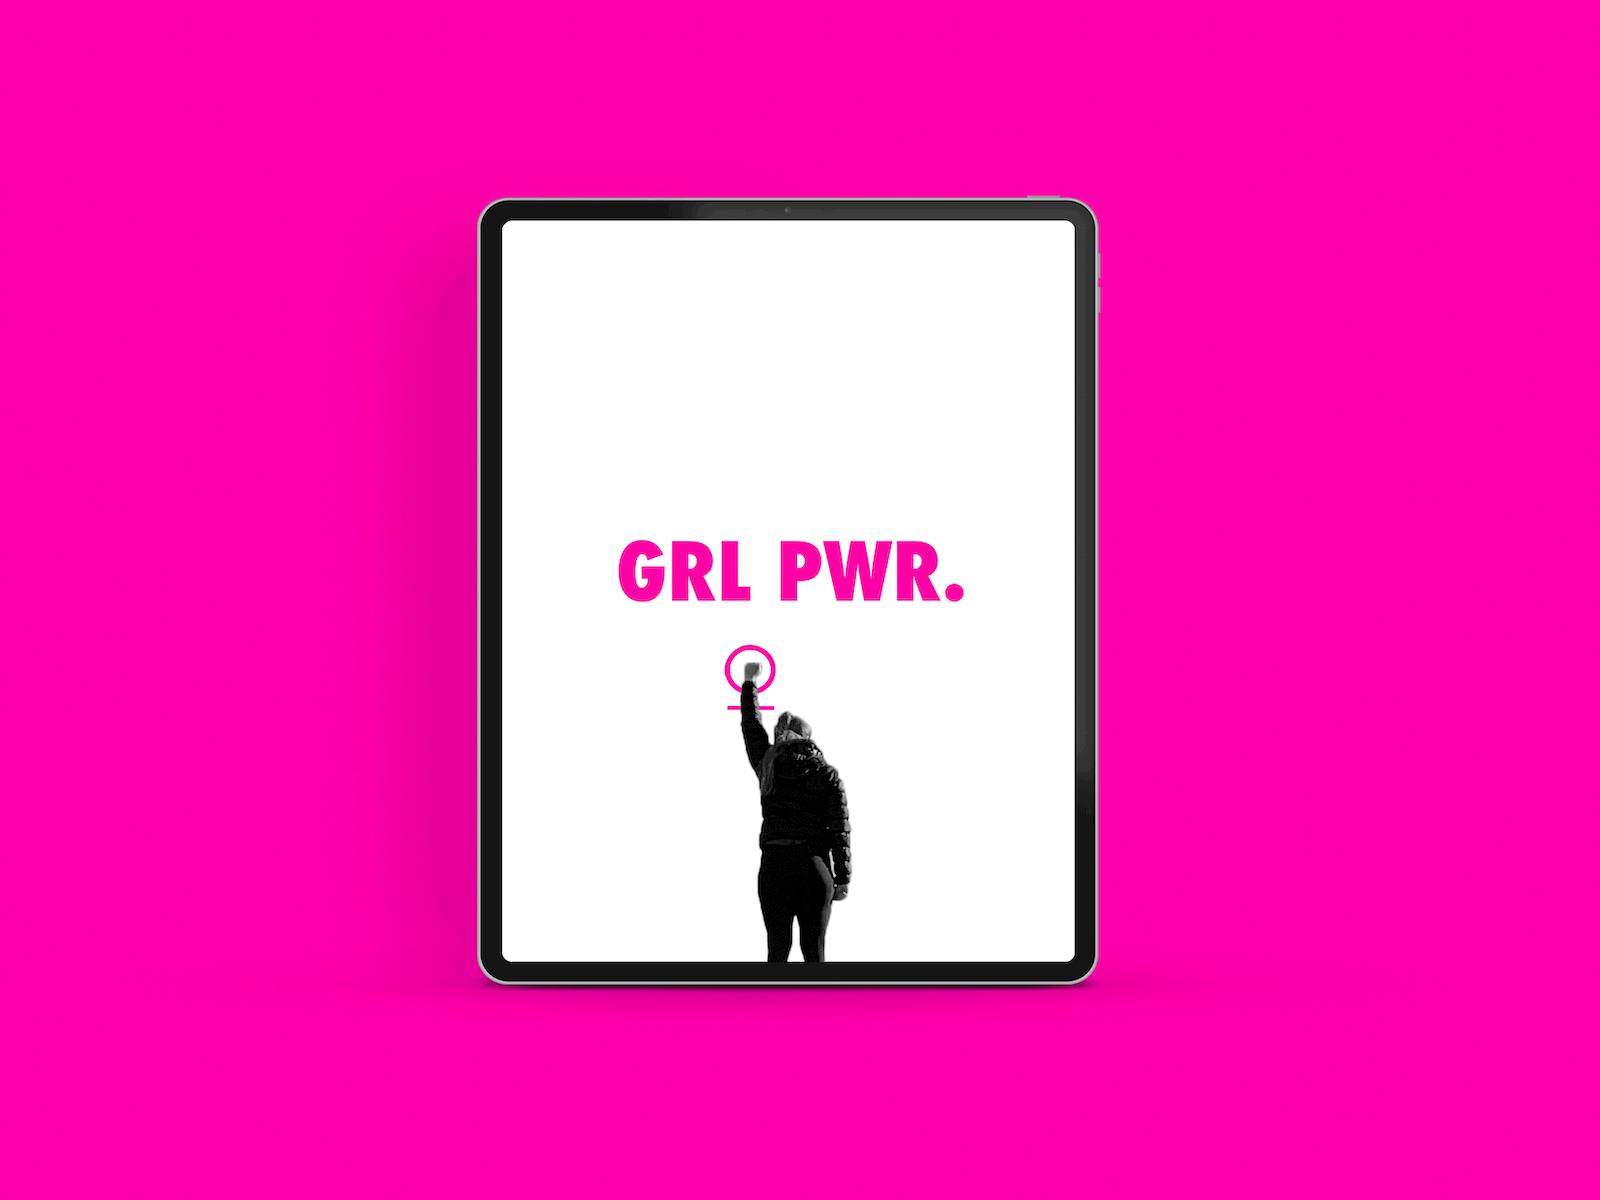 GRL PWR Women's Empowerment Animated GIF by Alana Hennessy on Dribbble